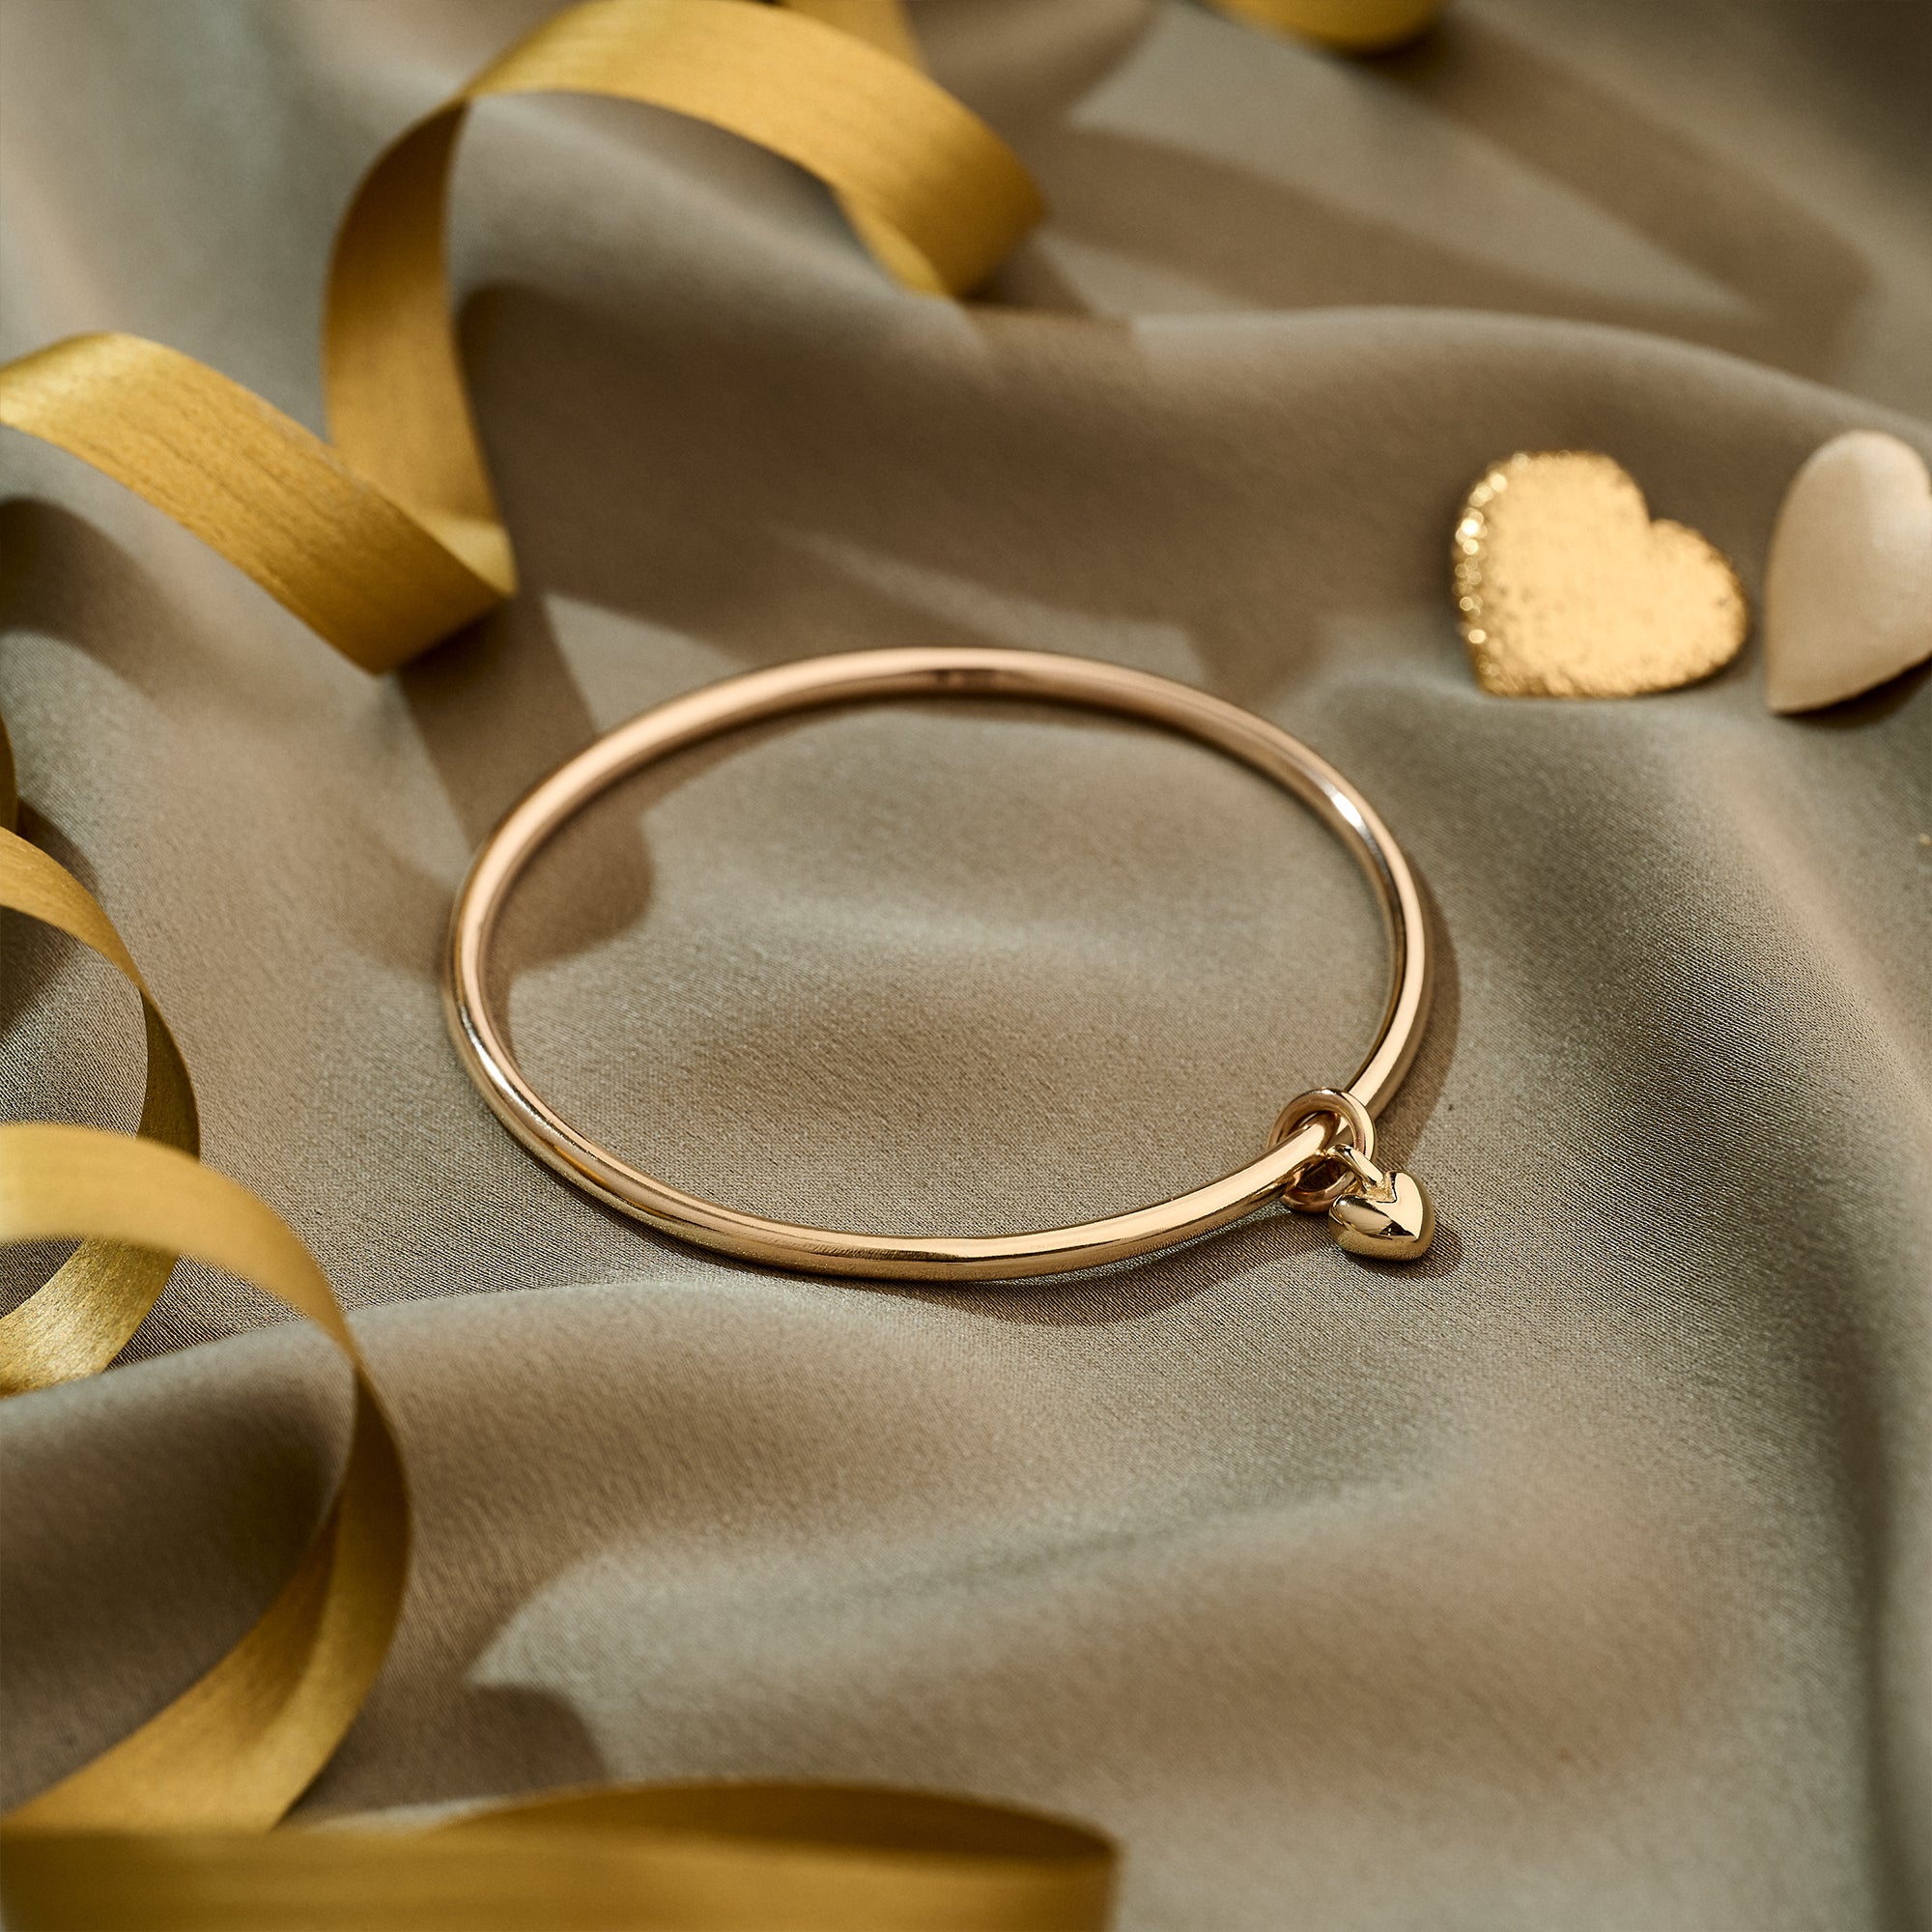 Sweetheart Recycled Solid Gold Heart Charm Bangle - Scarlett Jewellery